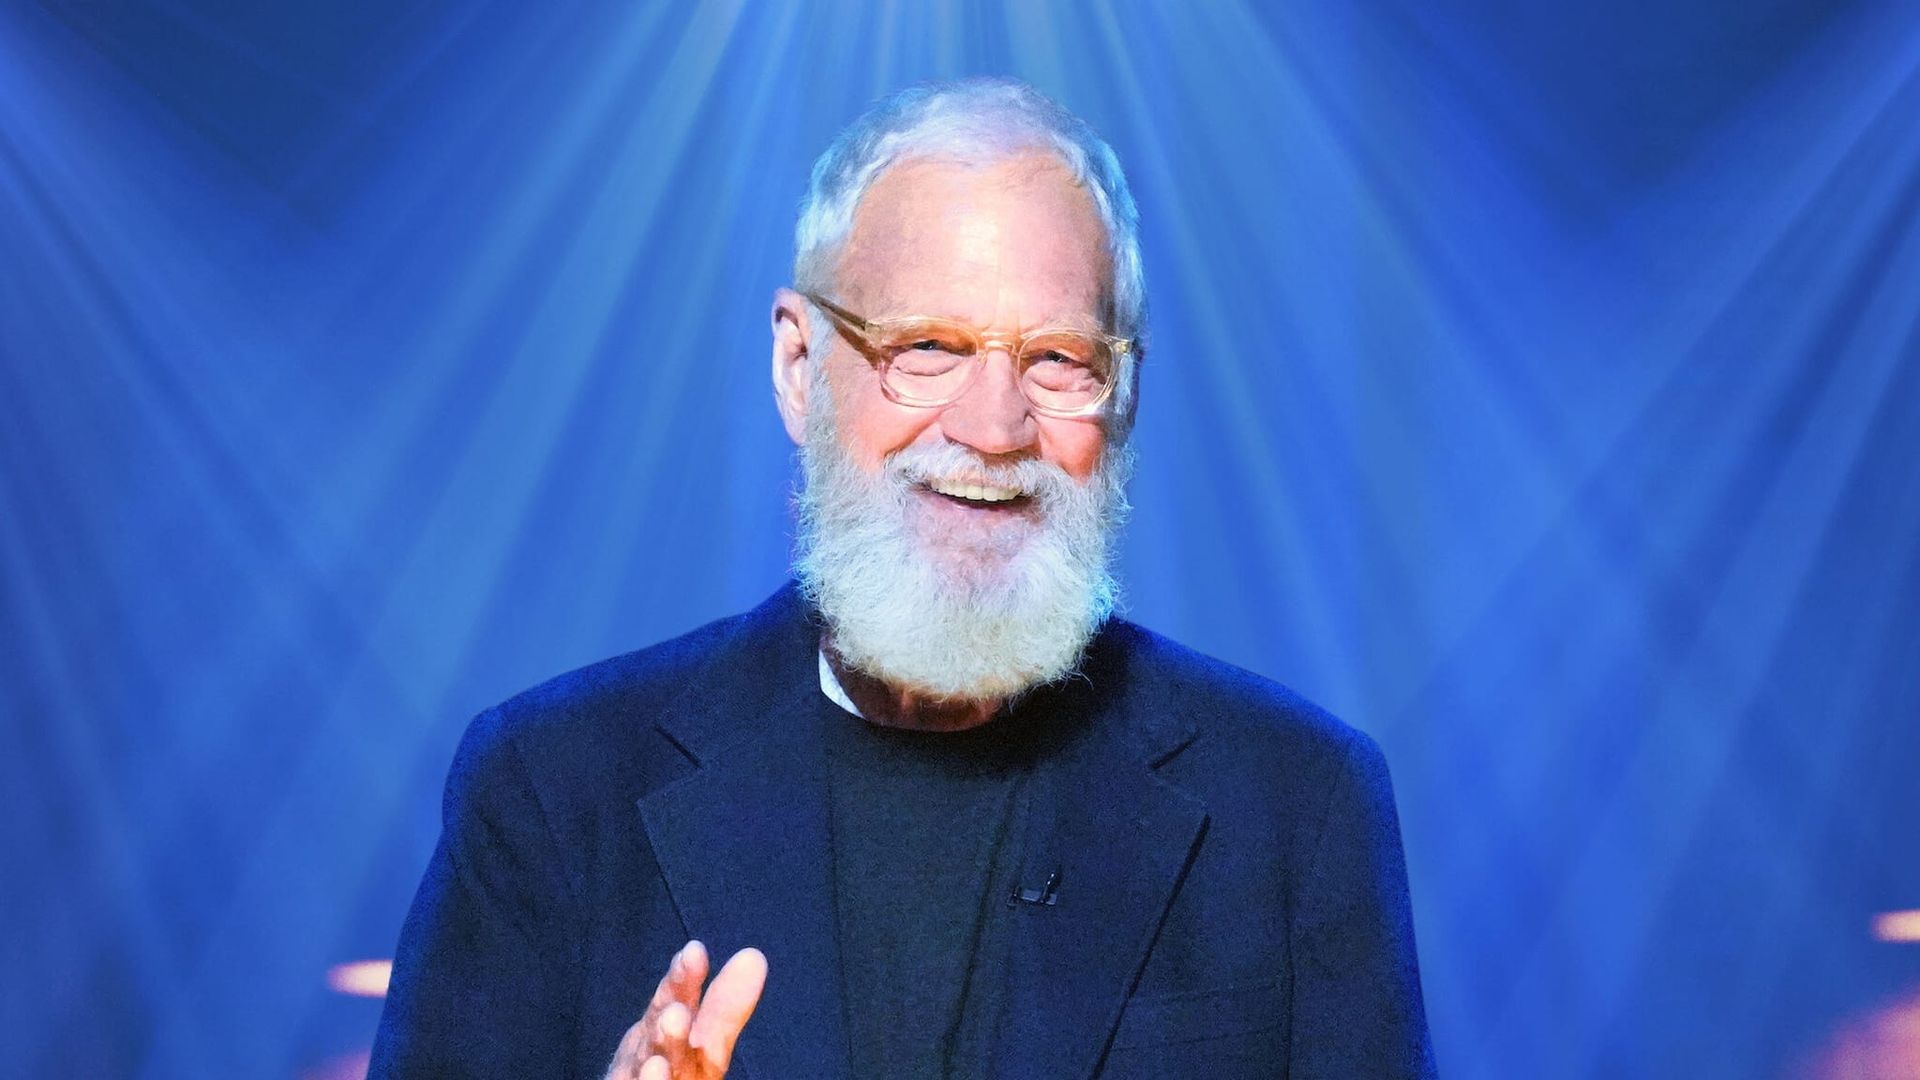 That's My Time with David Letterman background